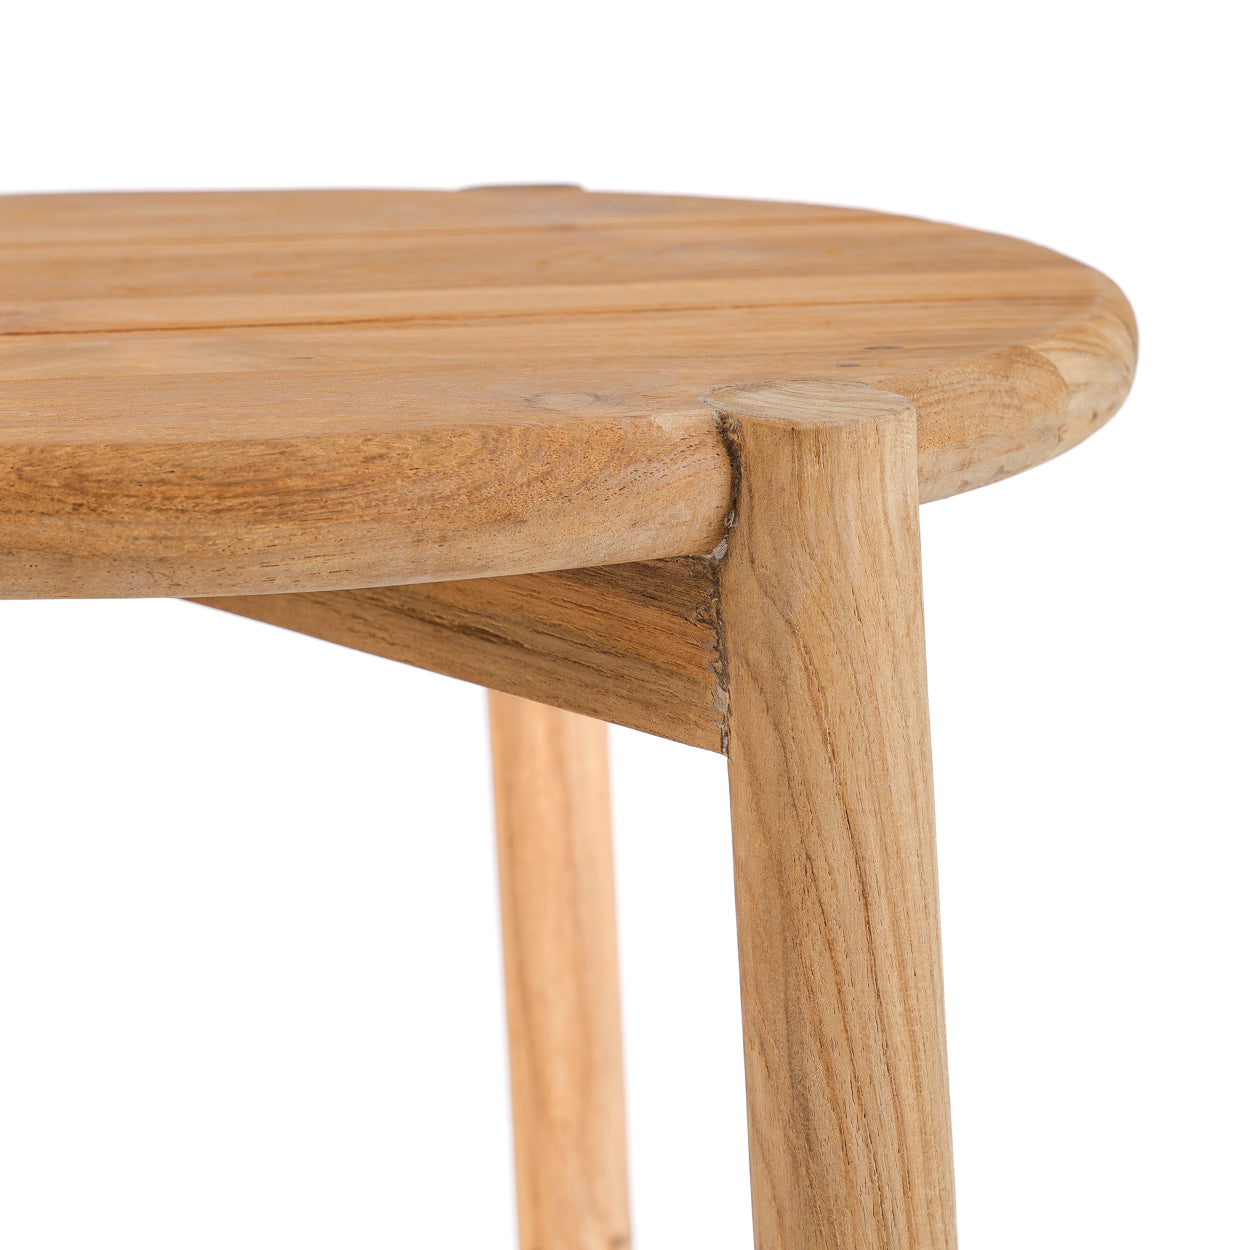 The GILIMANUK Side Table - Outdoor